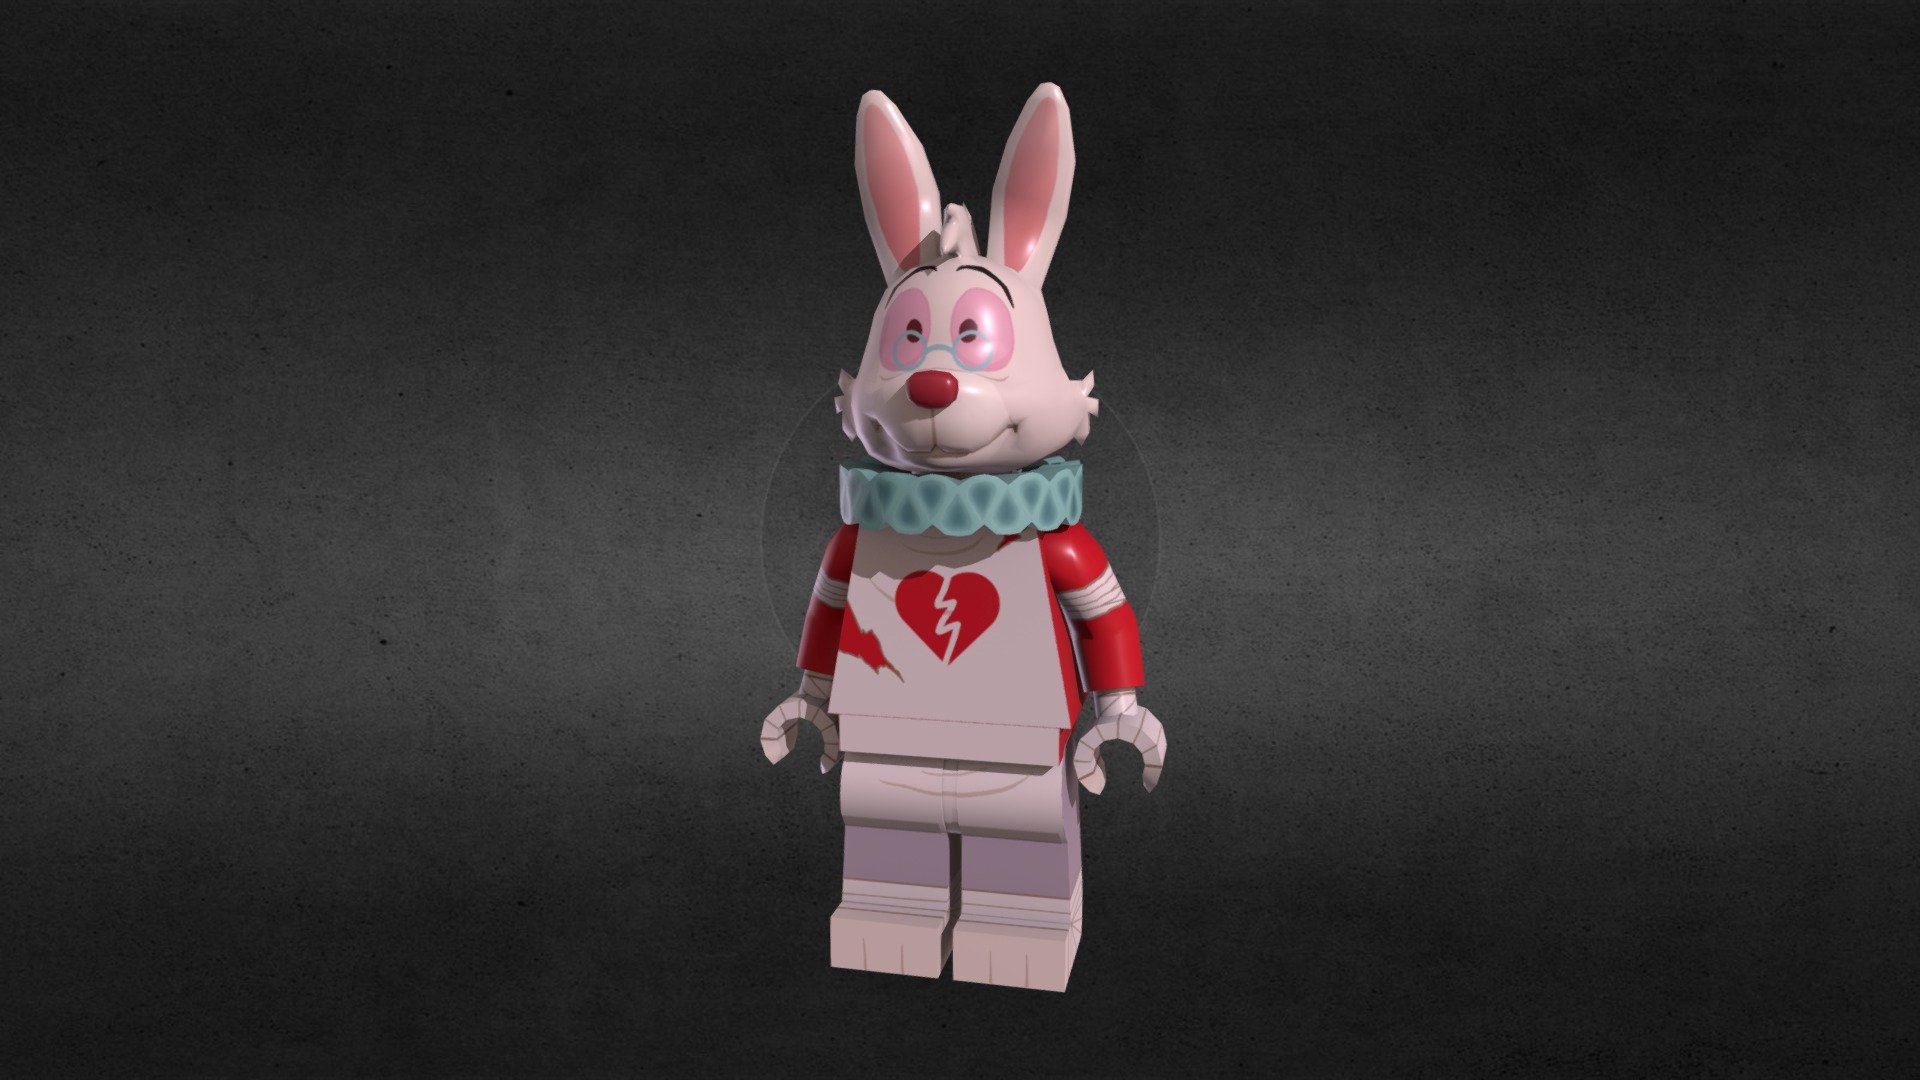 Made as an art test in my 3rd year of university.
I was assigned to create an Alice in Wonderand character crossed over with Lego/Street Fighter. This is the final outcome.
The final tri count is 2,218 tris 3d model